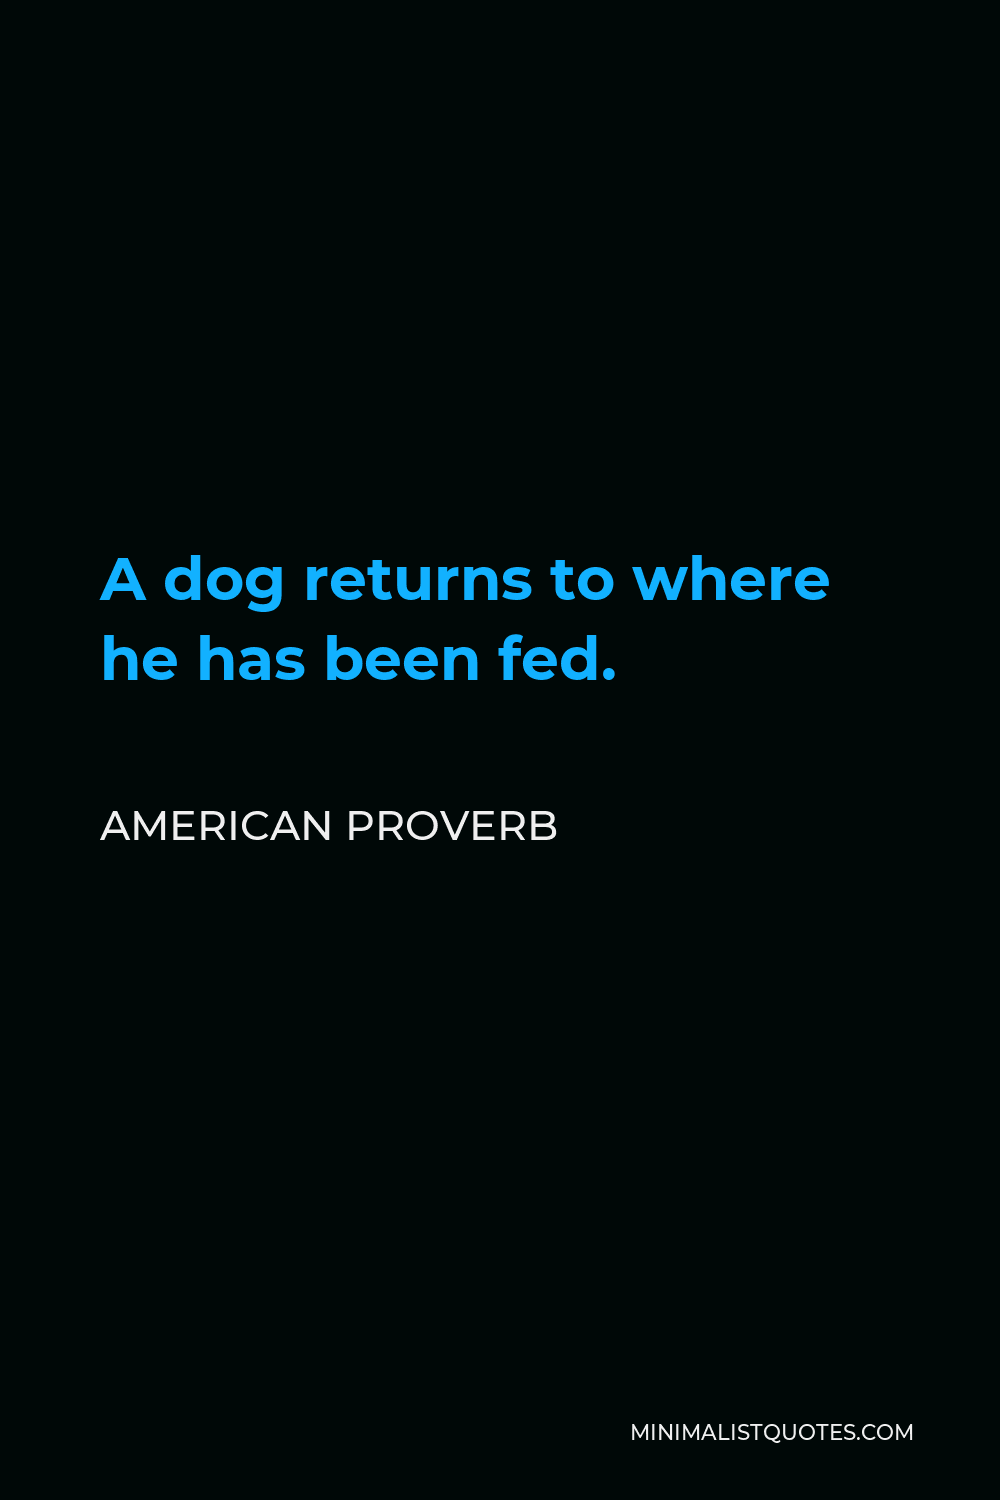 American Proverb Quote - A dog returns to where he has been fed.